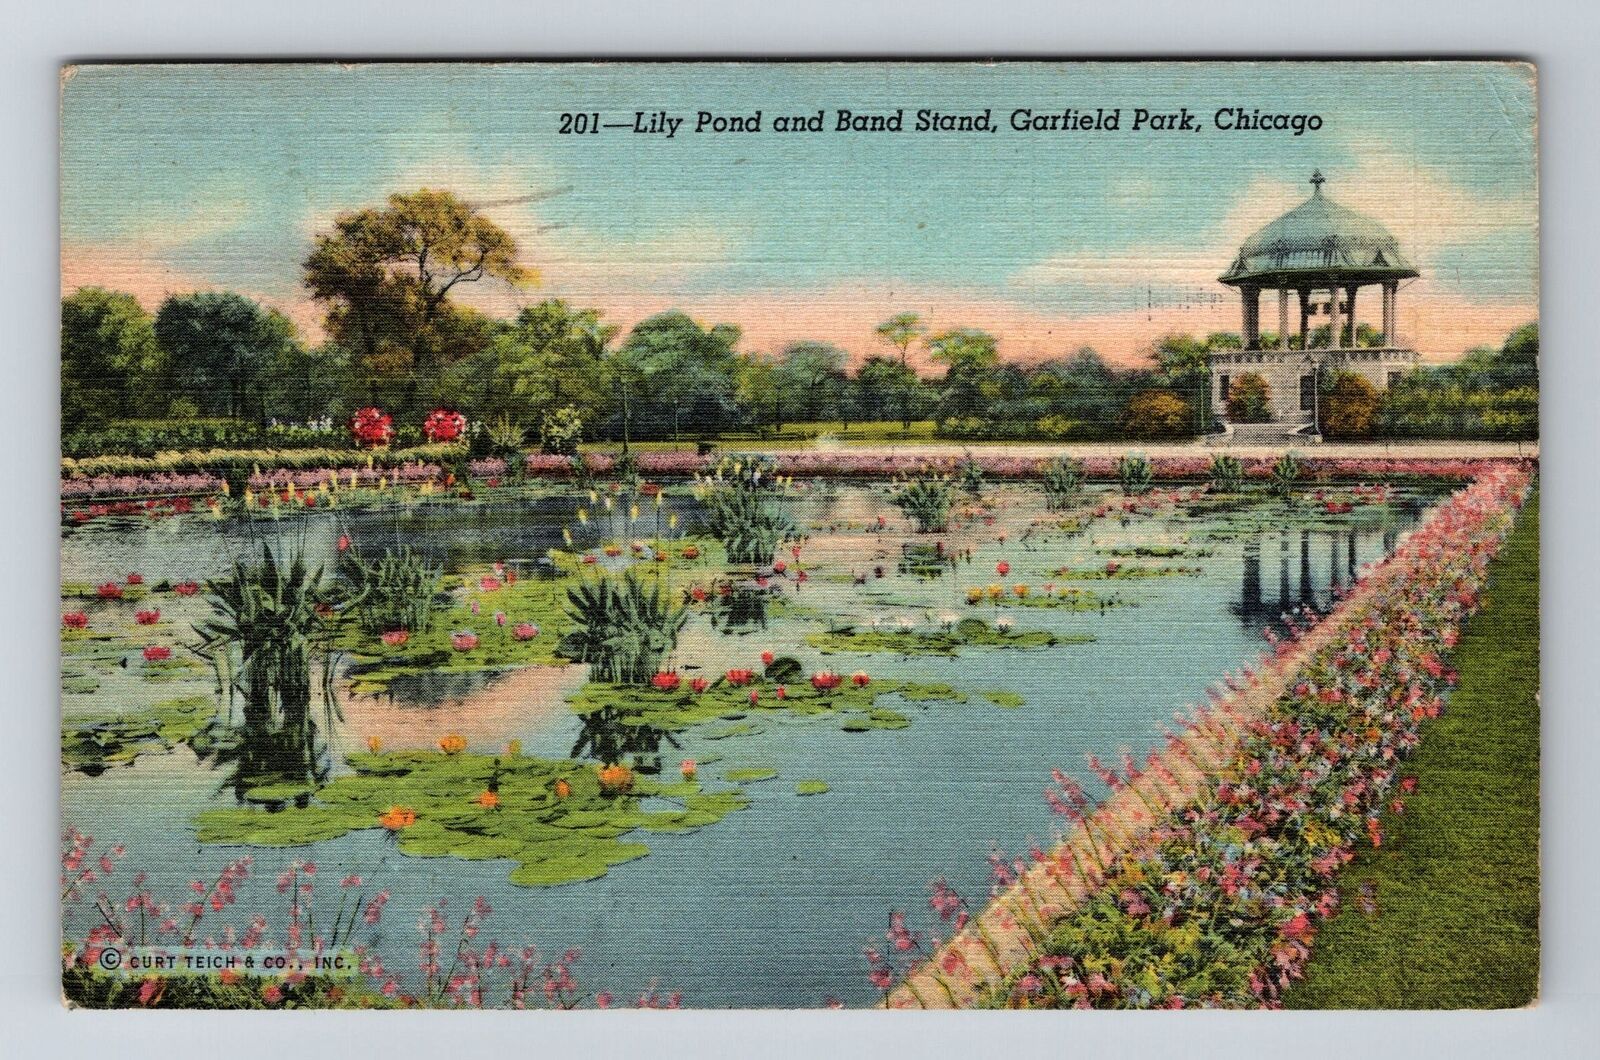 Chicago IL-Illinois, Garfield Park Lily Pond, Band Stand, c1946 Vintage Postcard